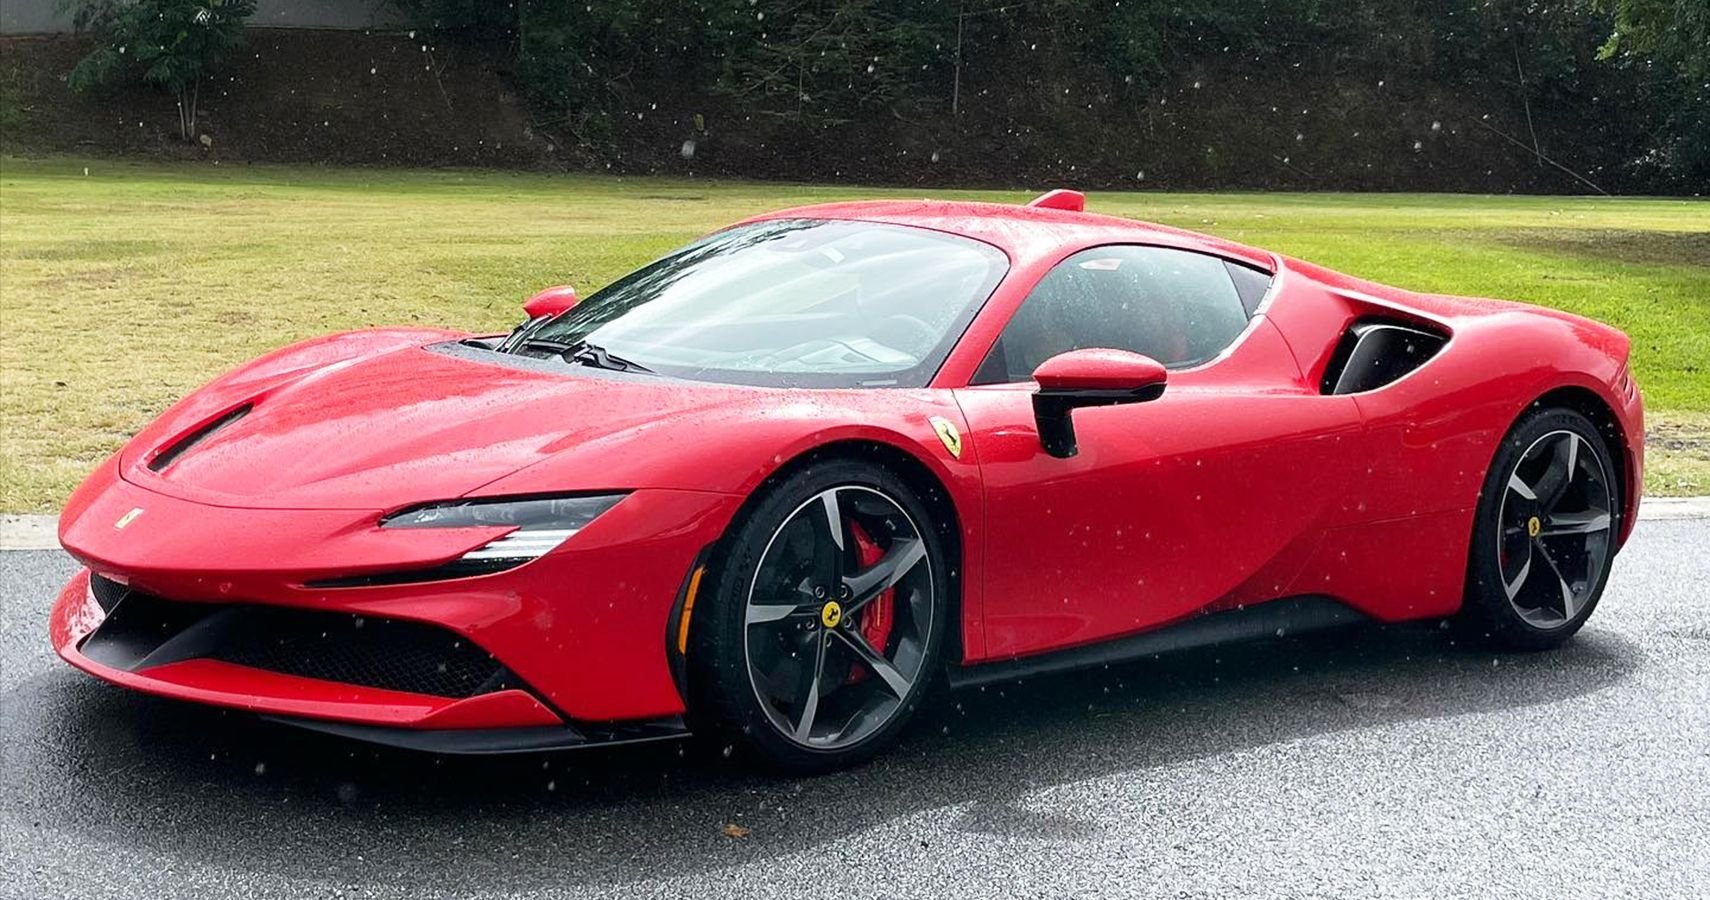 Watch This Ferrari SF90 Stradale Sprint To 60 MPH In 2.35 Seconds